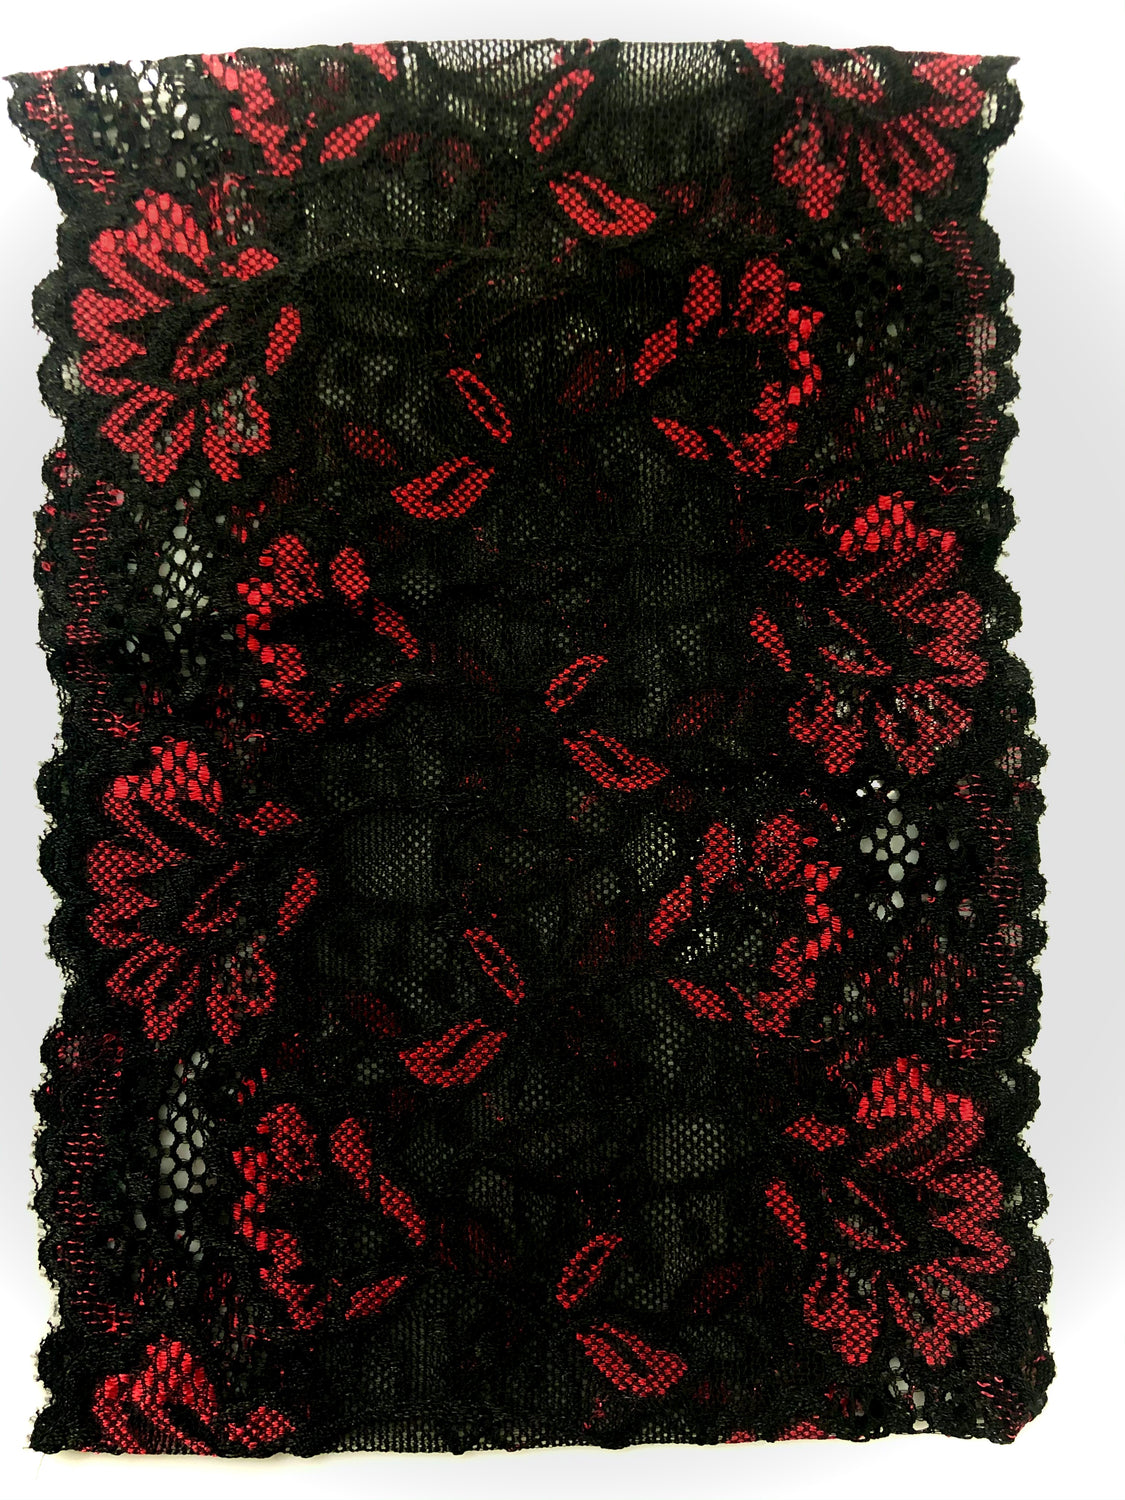 black and red lace undercap scarf bonnet for hijab